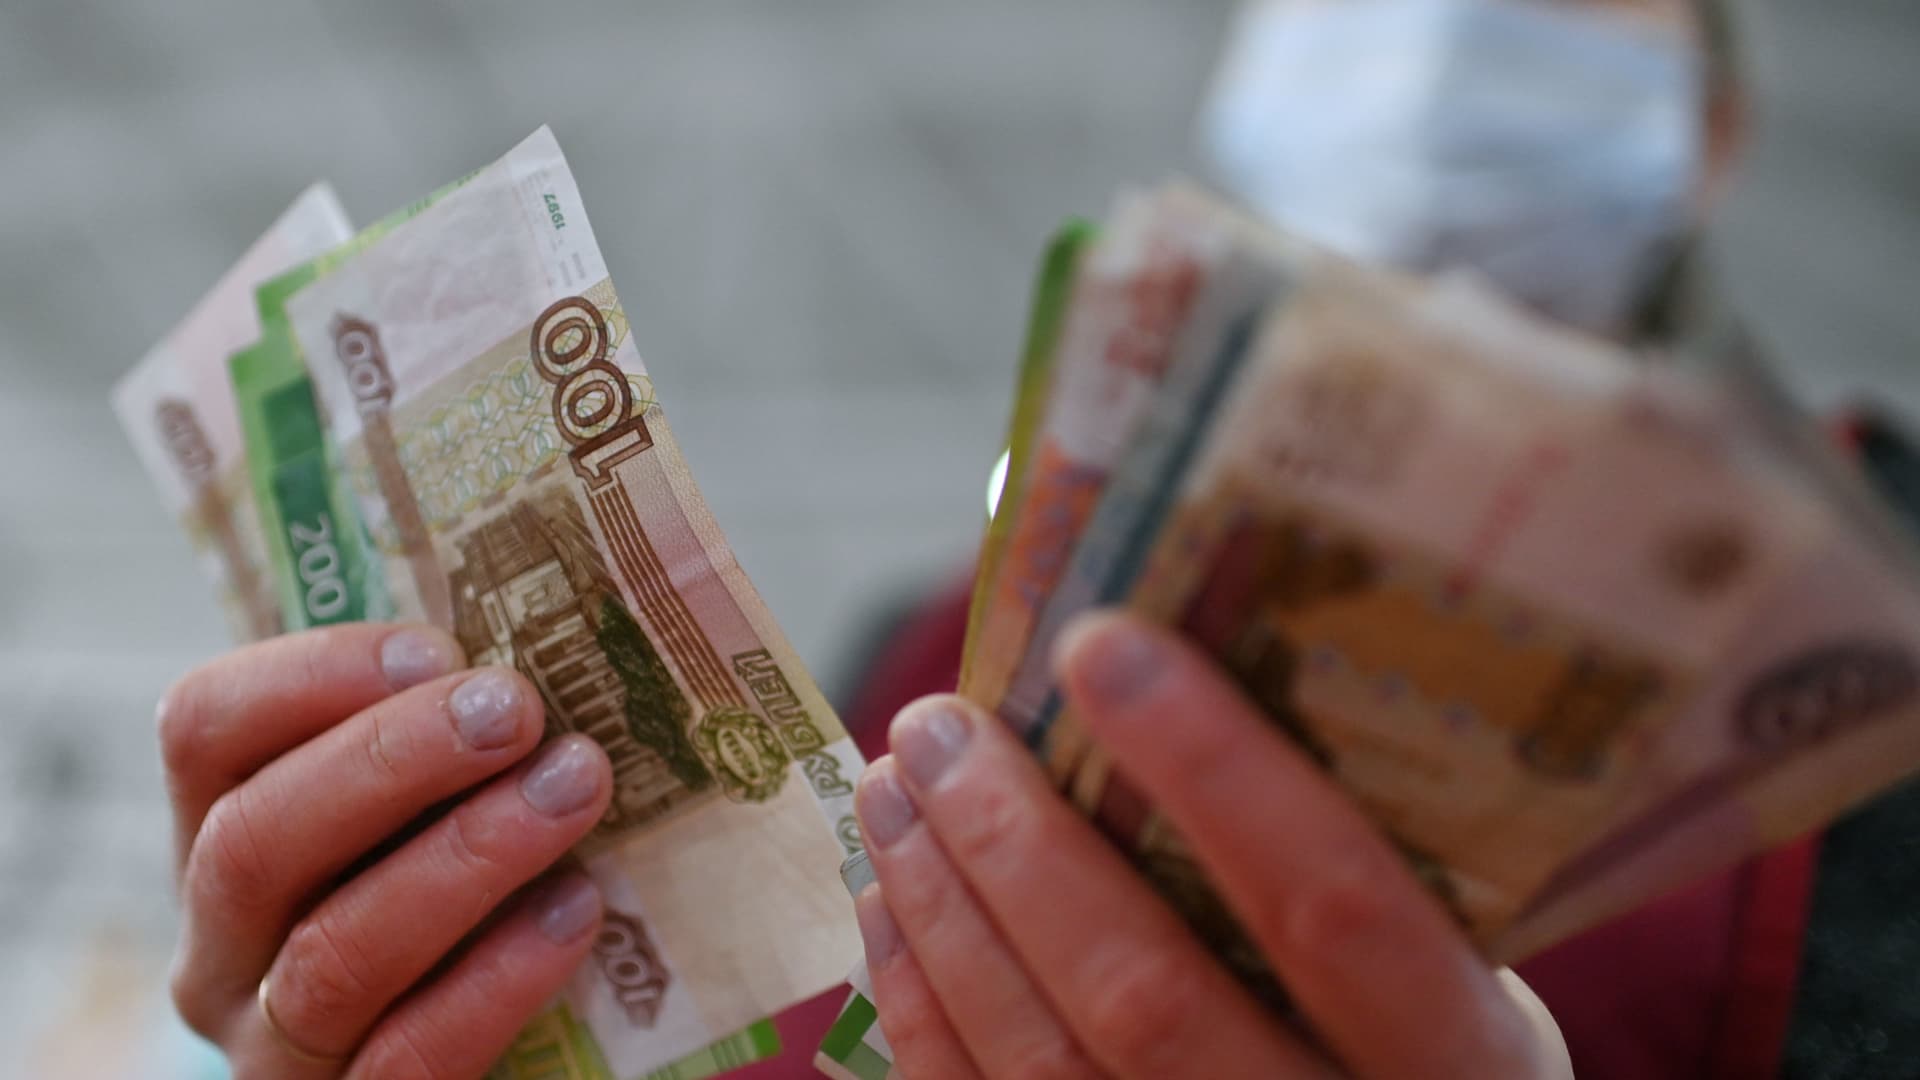 A vendor counts Russian rouble banknotes at a market in Omsk, Russia February 18, 2022.